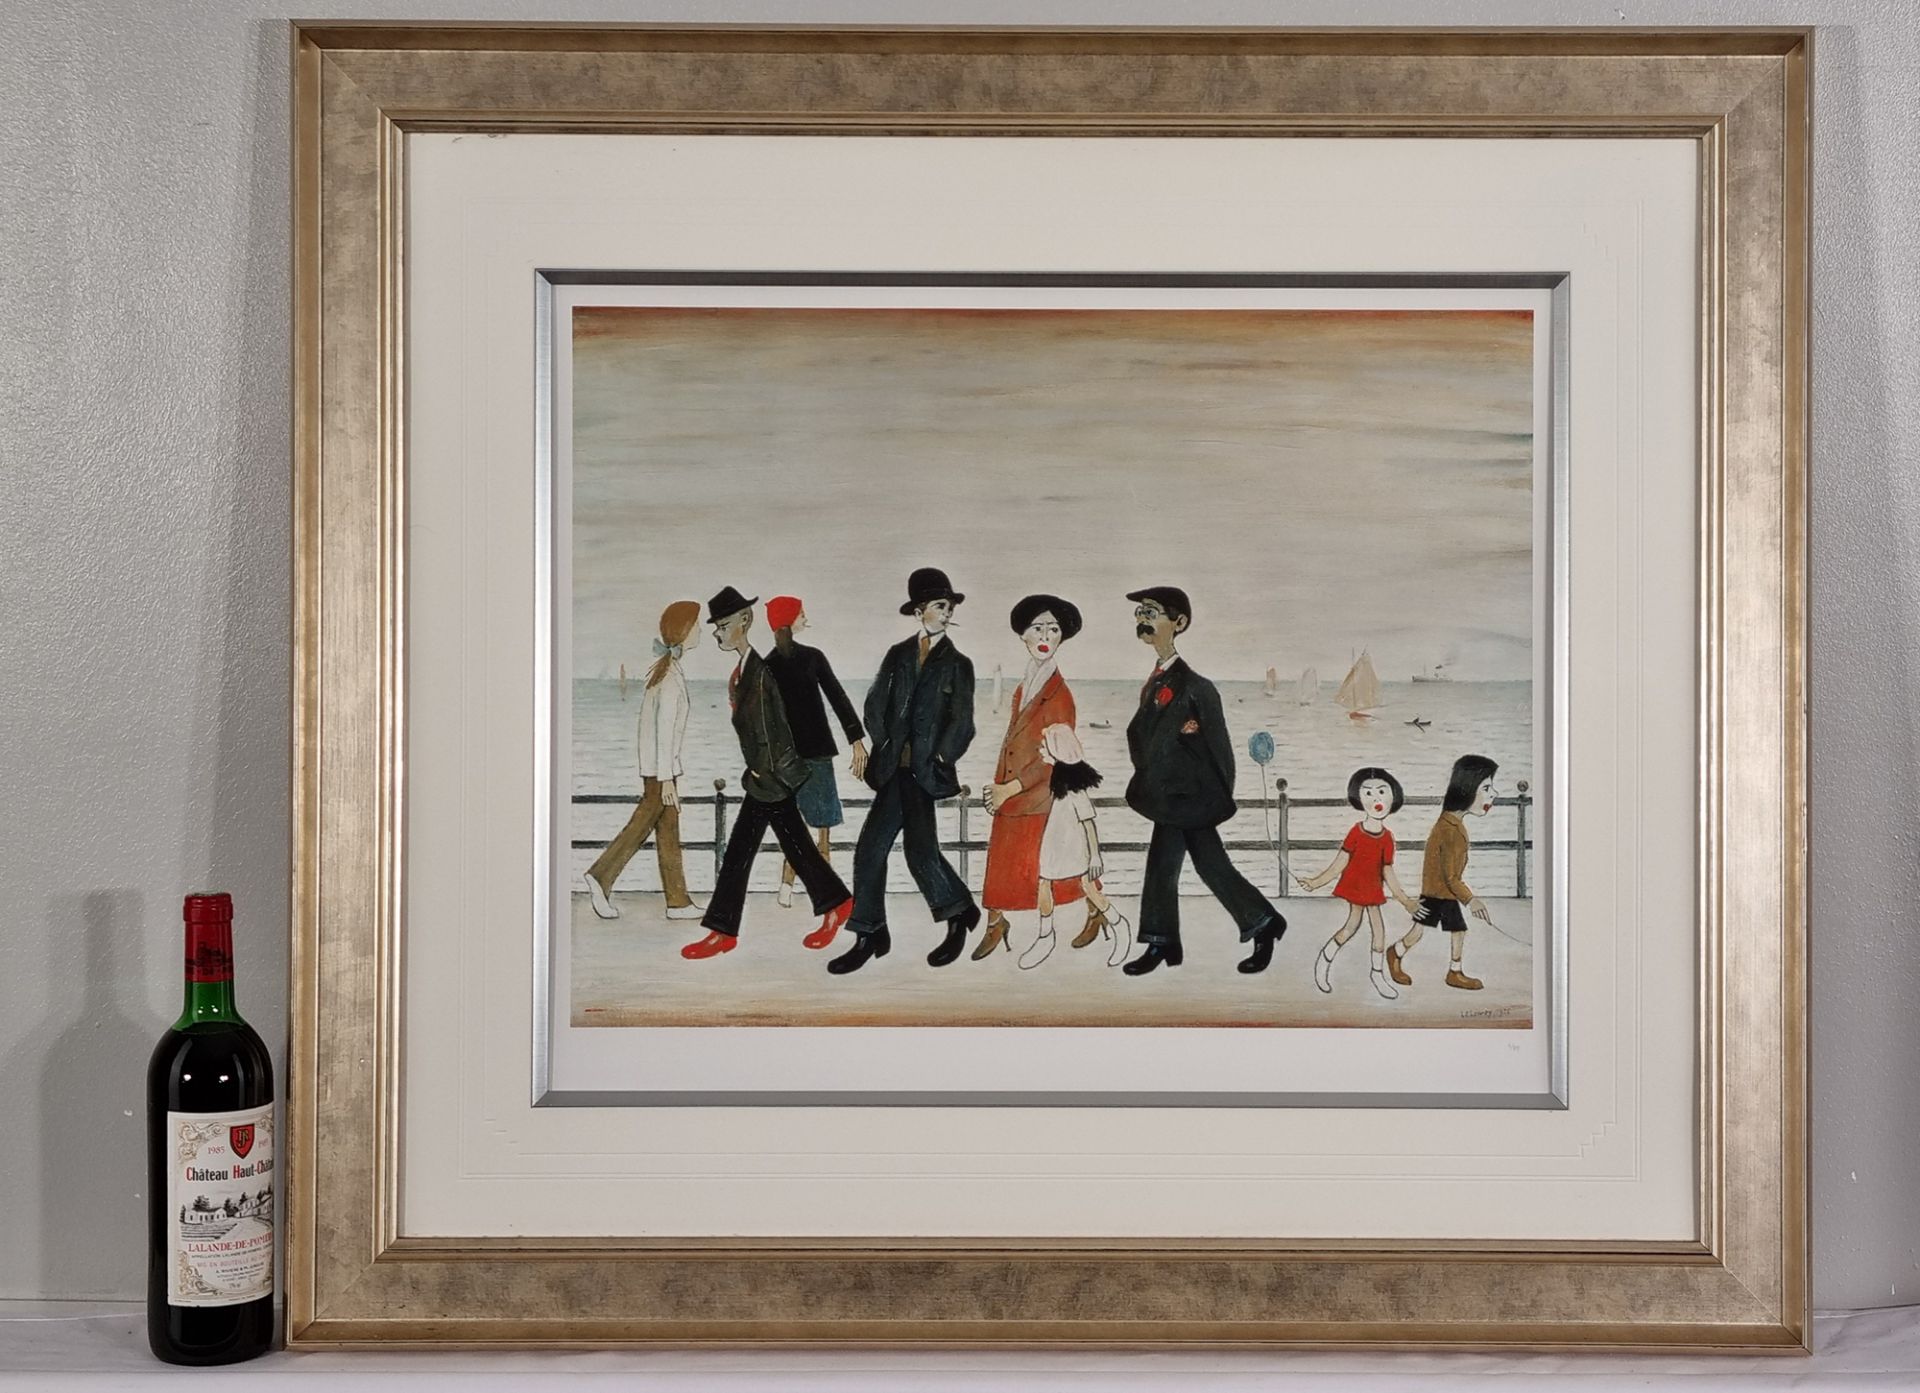 Limited Edition L.S. Lowry ""On The Promenade"" - Image 7 of 7